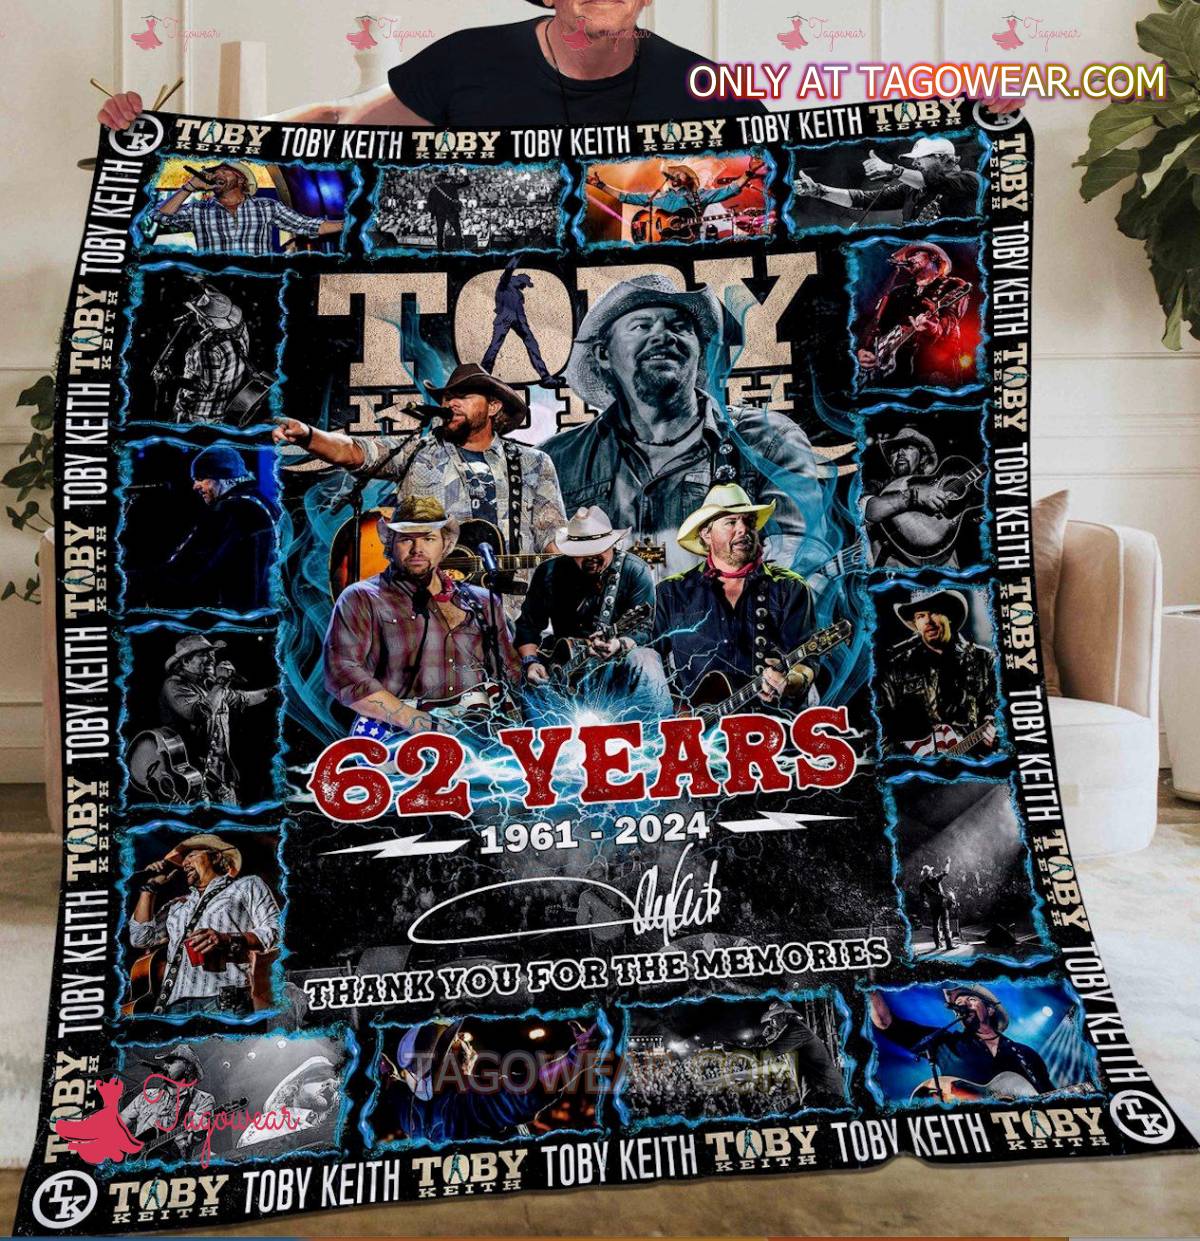 Toby Keith 62 Years 1961-2024 Signature Thank You For The Memories Blanket